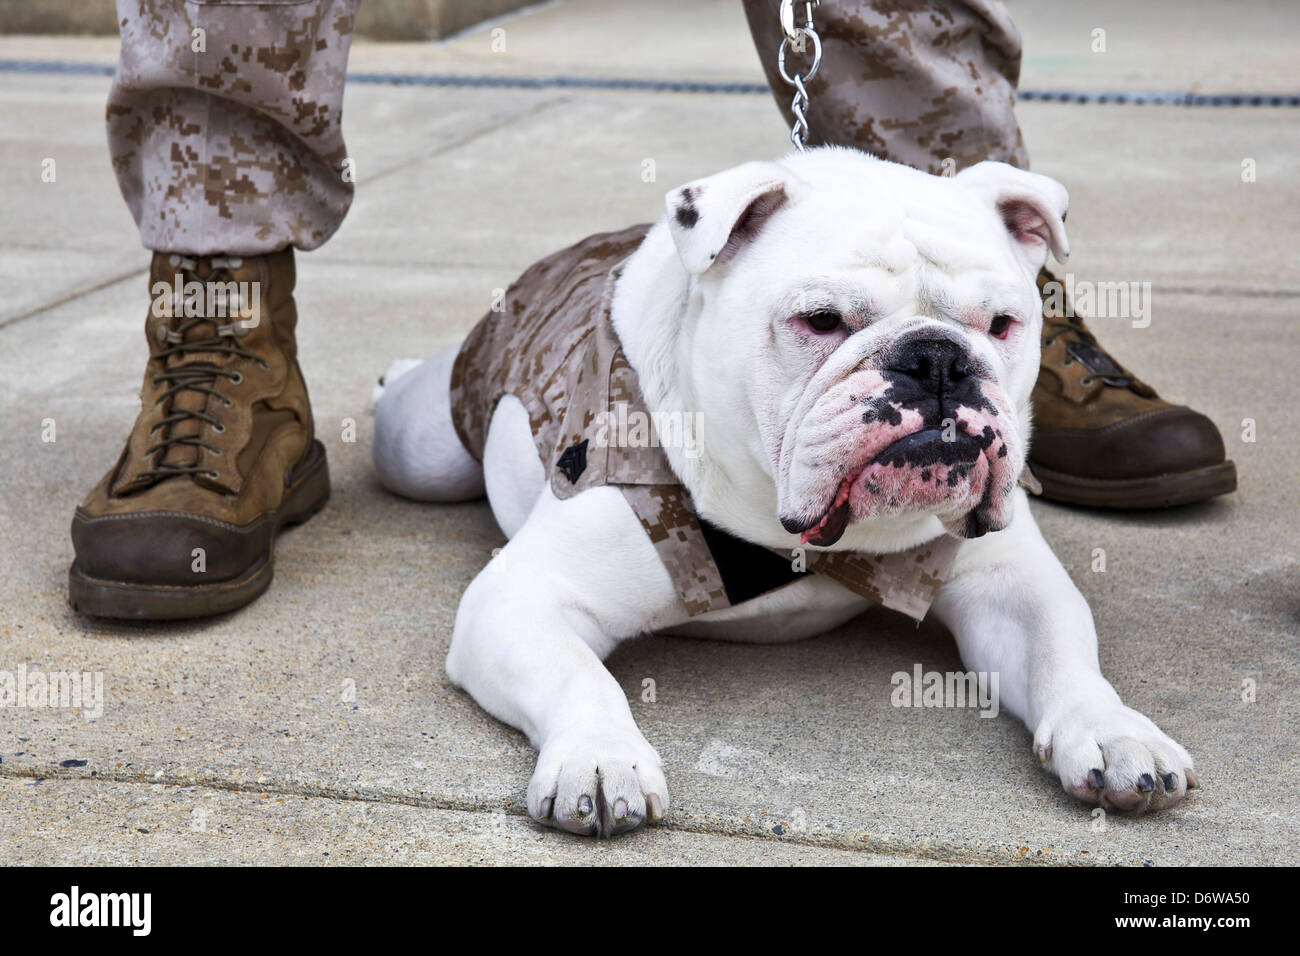 The outgoing Marine Corps mascot, Sgt. Chesty XIII, lays on the ground following the Eagle Globe and Anchor pinning ceremony for incoming Marine Corps mascot Private First Class Chesty XIV April 8, 2013 in Washington, DC. The English bulldog has been the choice of breed for Marine mascot since the 1950s, with each being named Chesty in honor of the highly decorated late Gen. Lewis Chesty Puller. Stock Photo